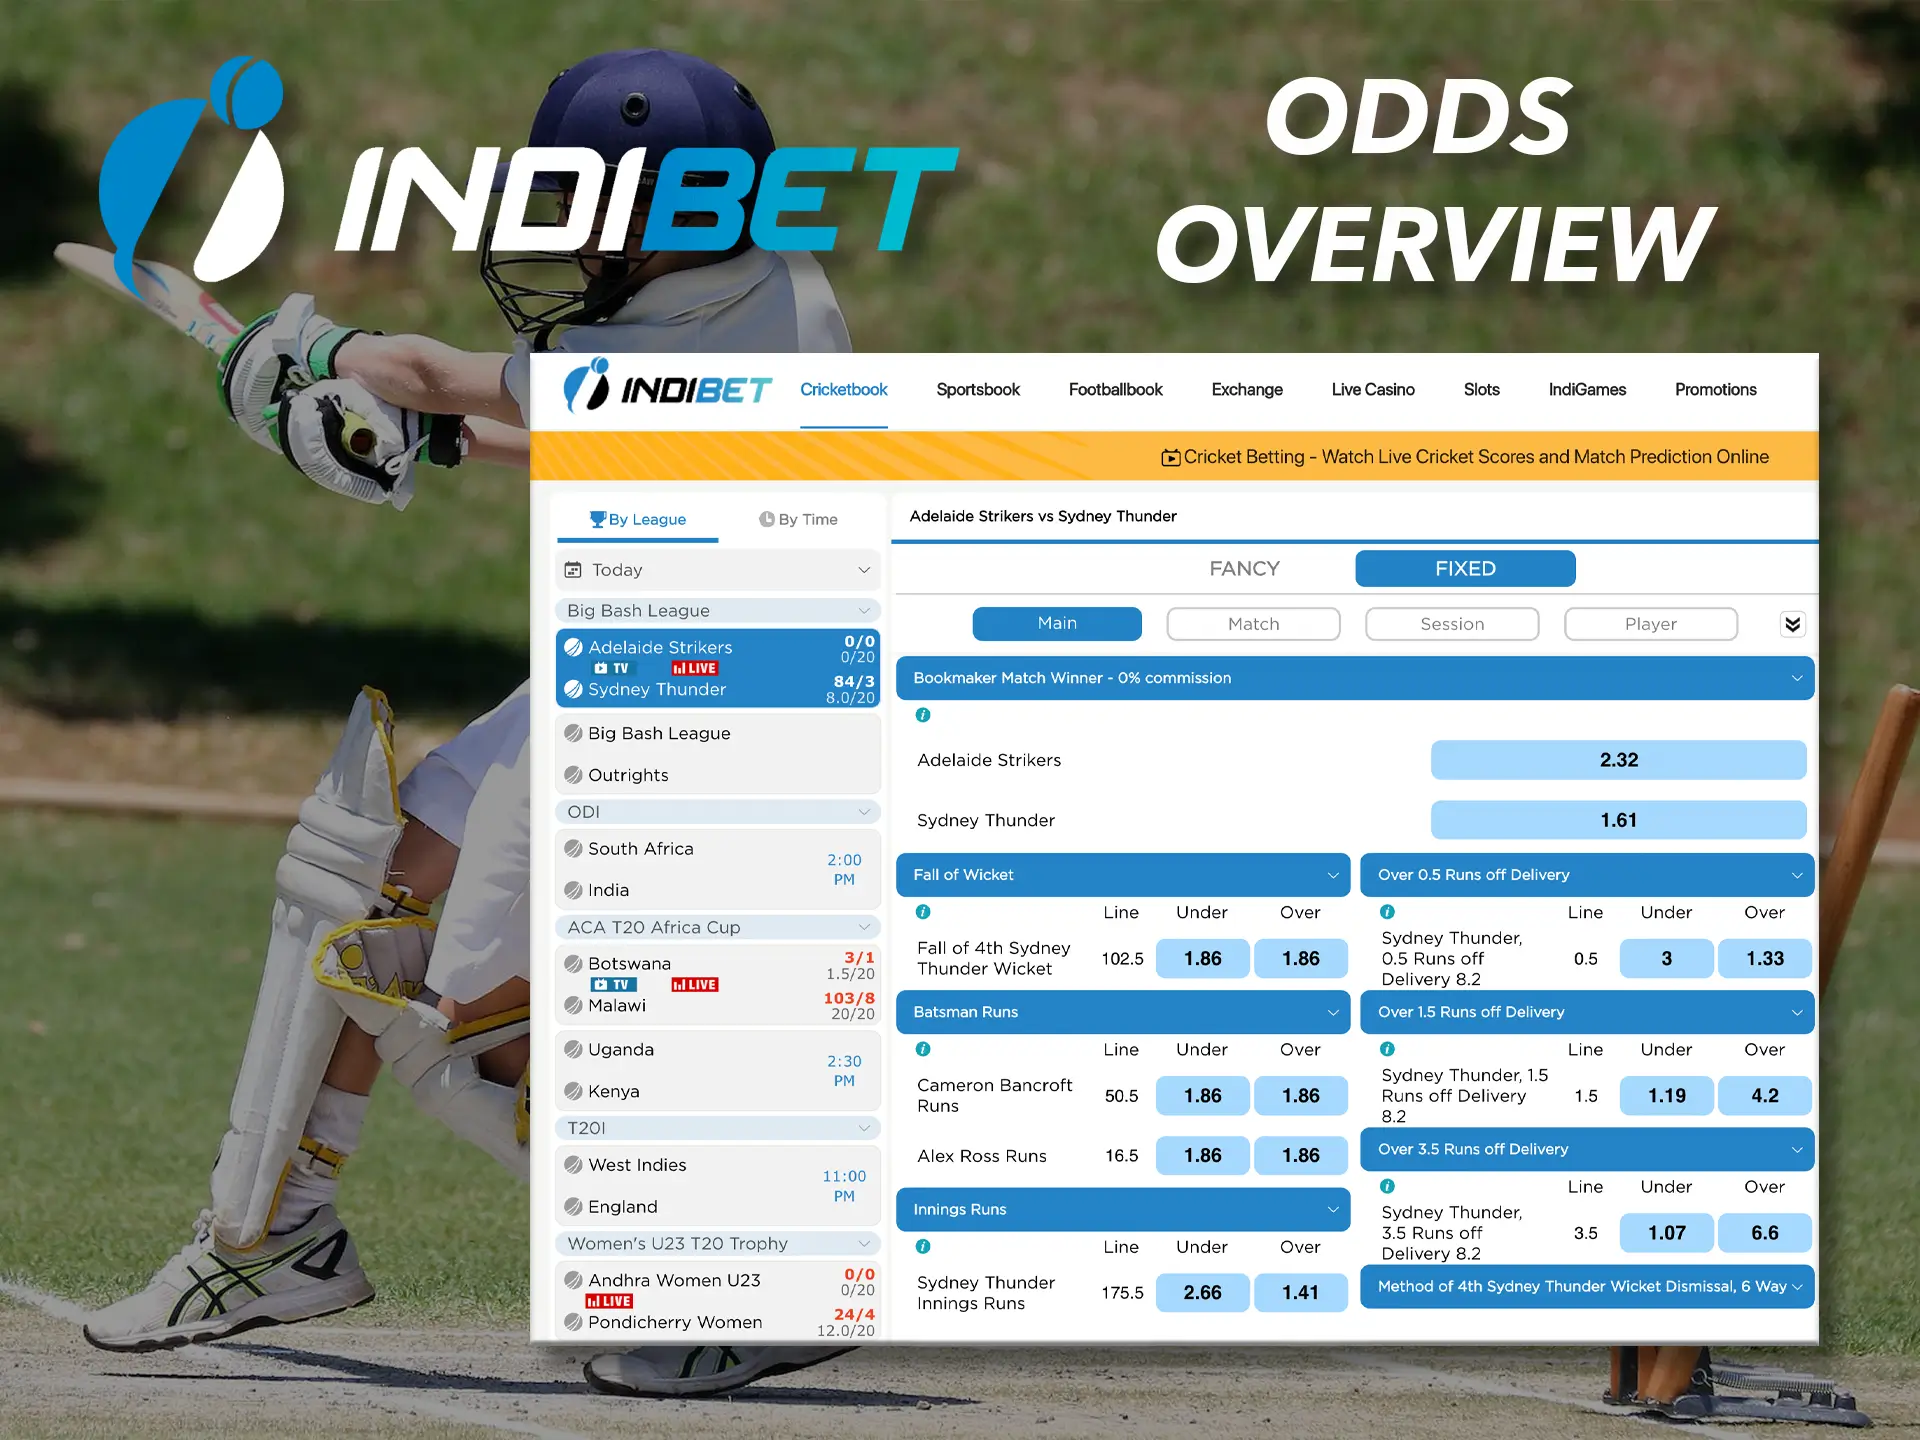 You'll find the best odds and variety of odds at Indibet.